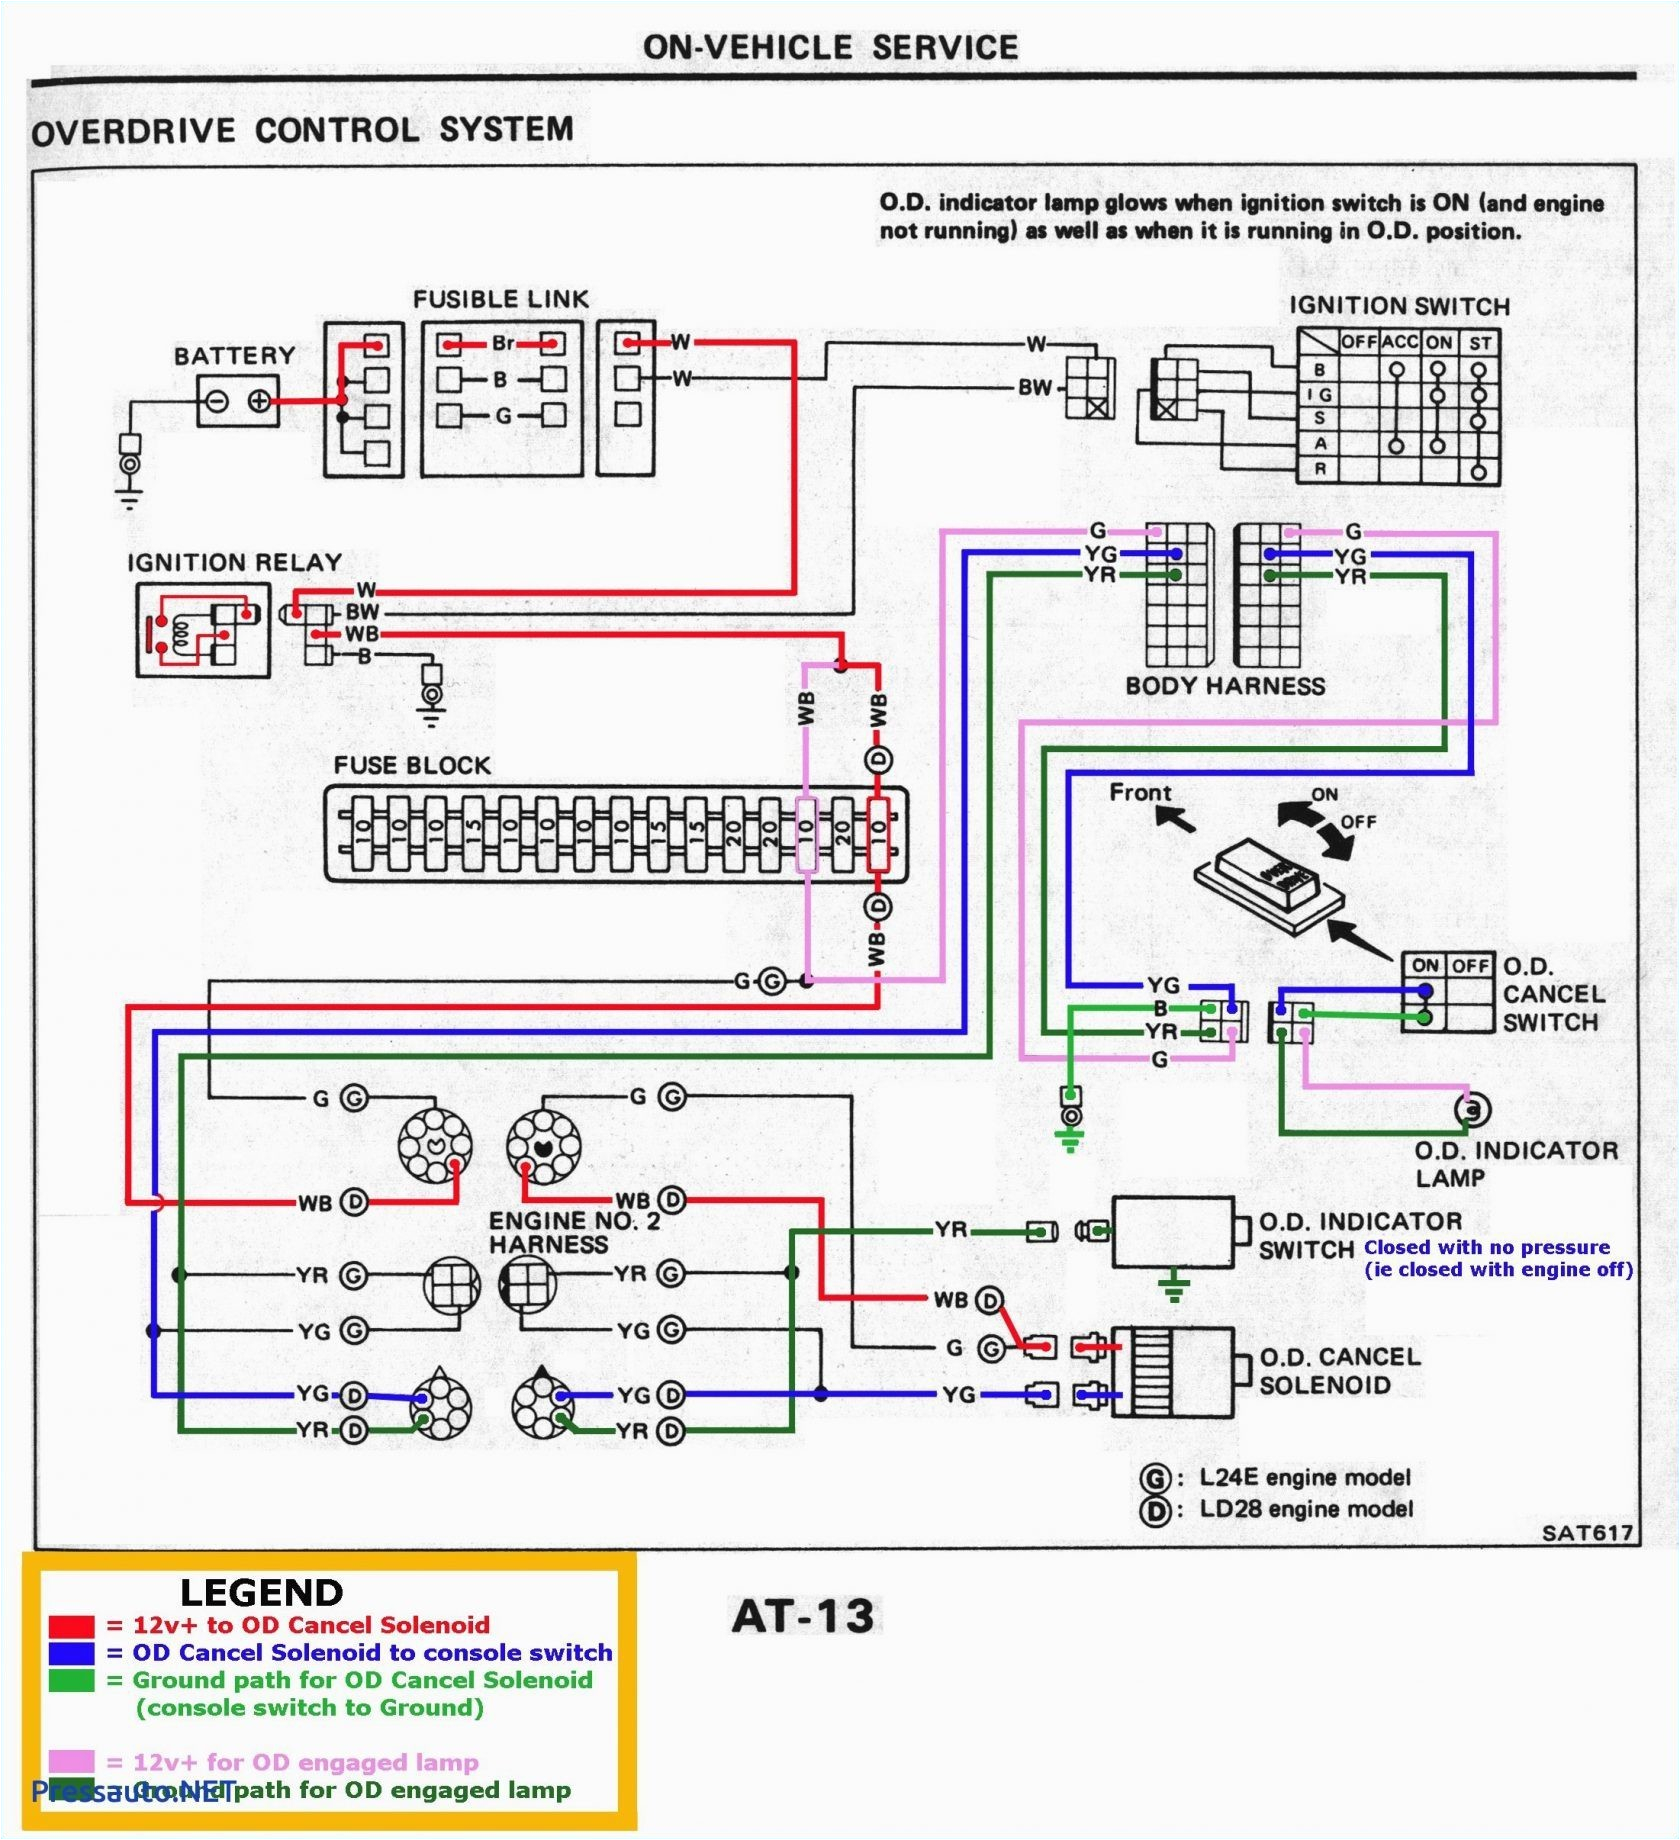 home fuse box colors wiring diagram db fuse box wiring color fuse box wiring color